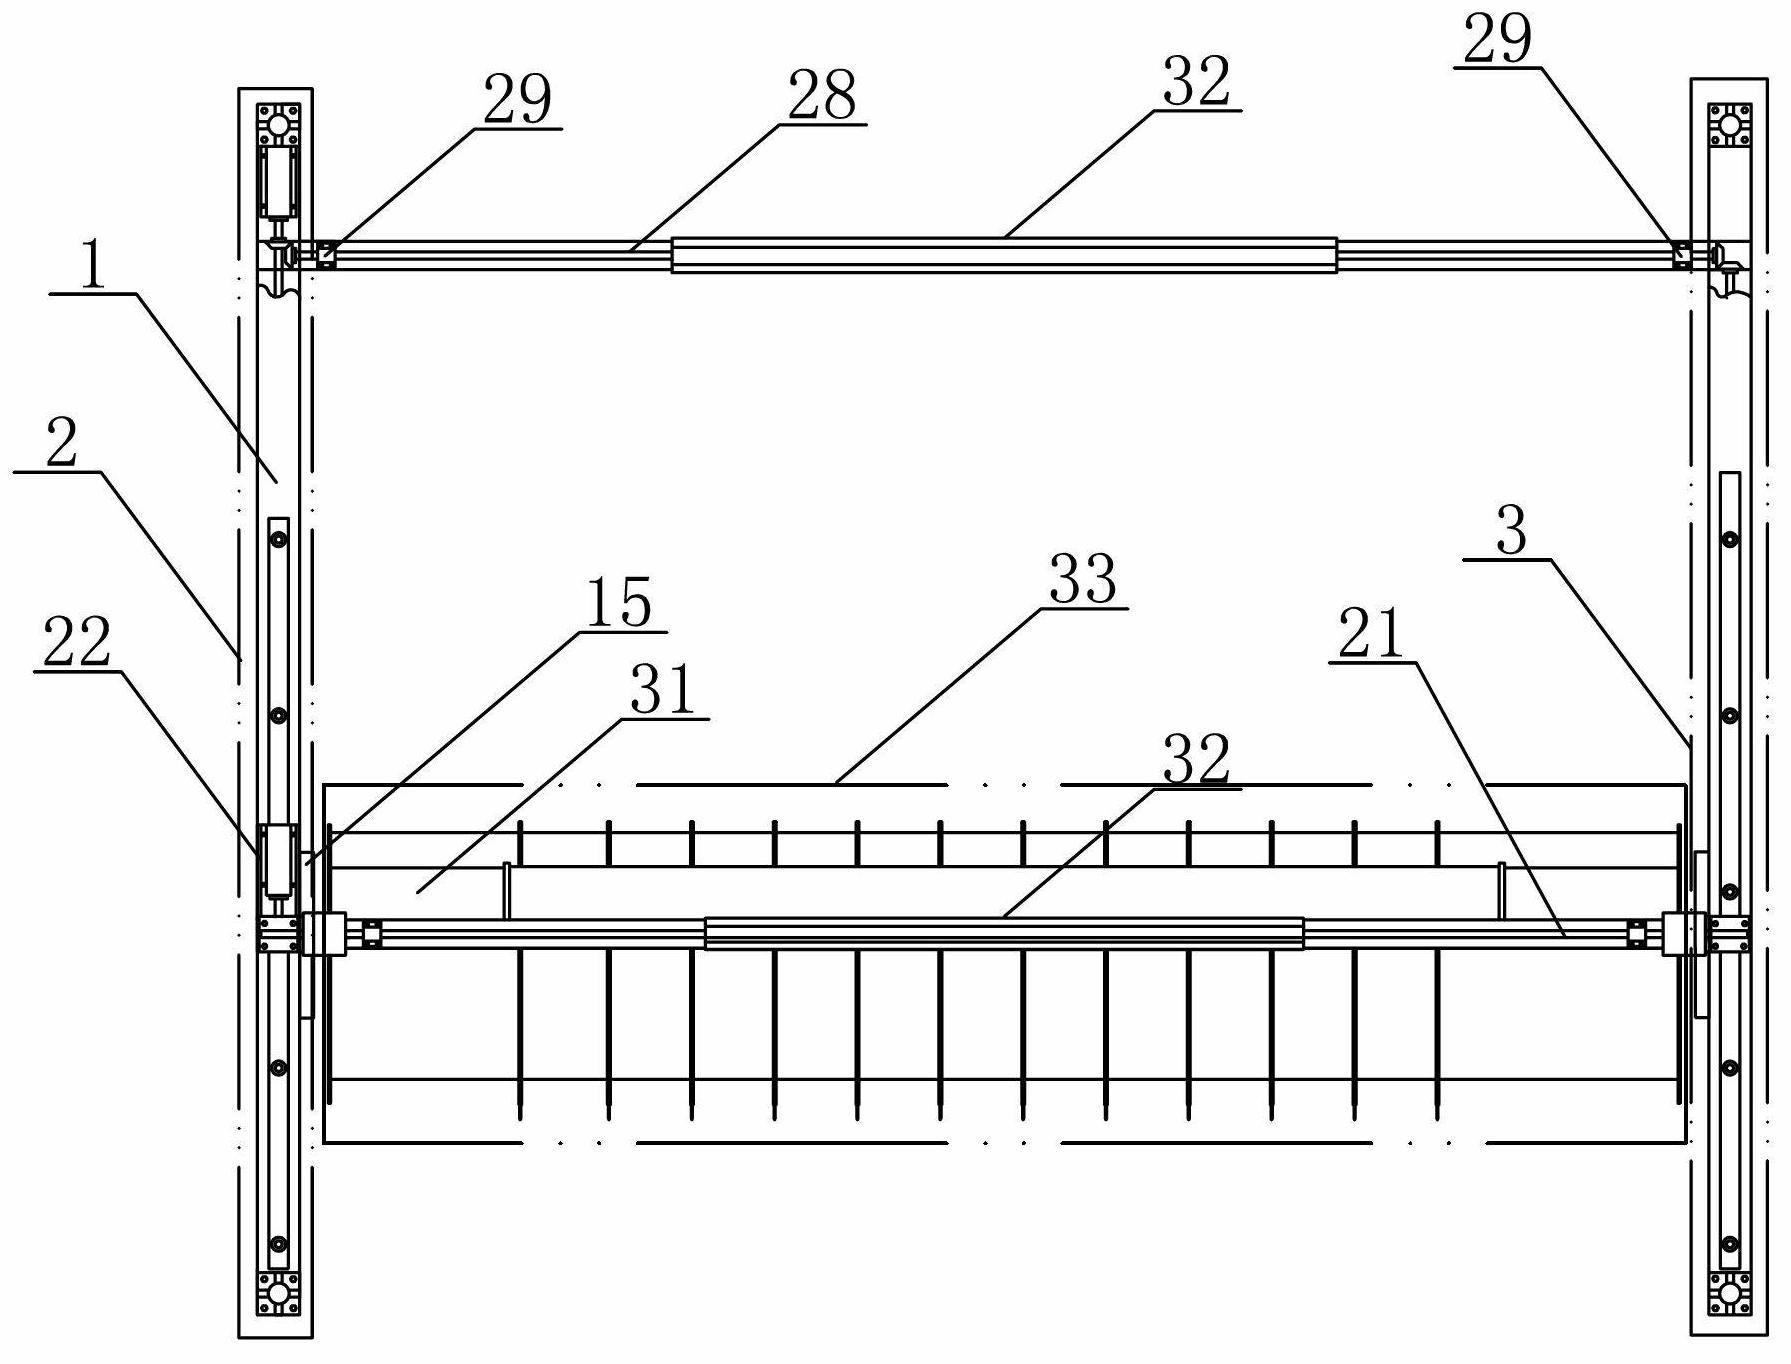 Quasi-three-dimensional automatic measurement system for wind tunnels of atmospheric boundary layer